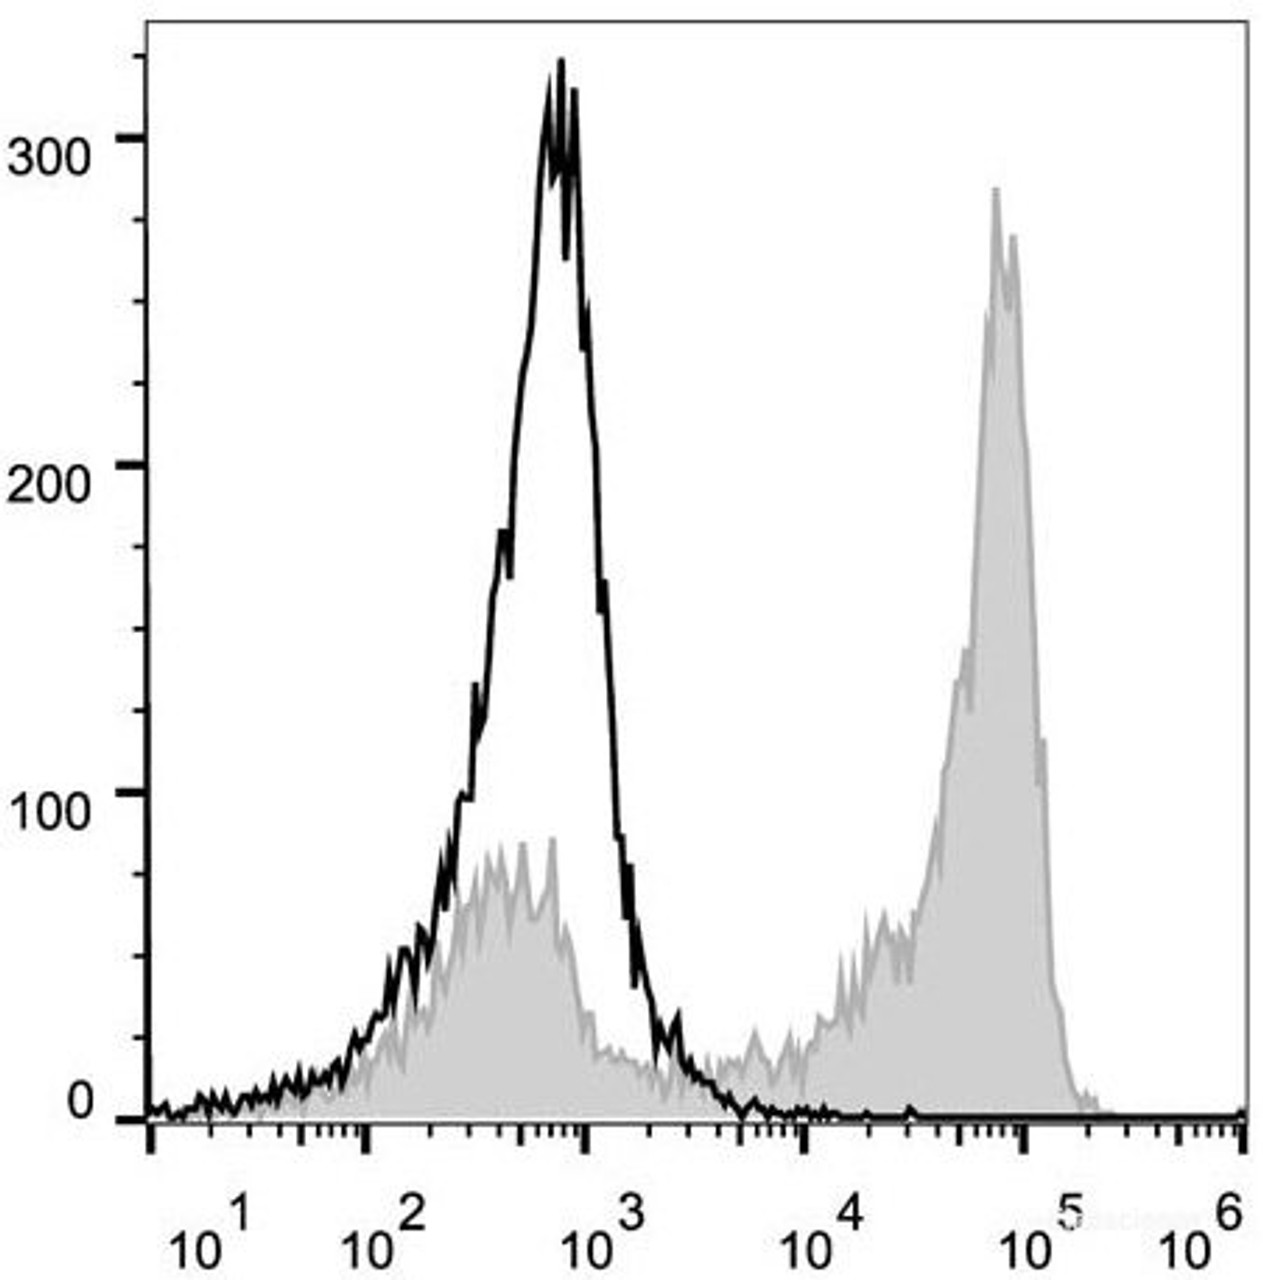 C57BL/6 murine bone marrow cells are stained with PerCP/Cyanine5.5 Anti-Mouse/Human CD11b Antibody[Used at .5 μg/1<sup>6</sup> cells dilution](filled gray histogram). Unstained bone marrow cells (empty black histogram) are used as control.